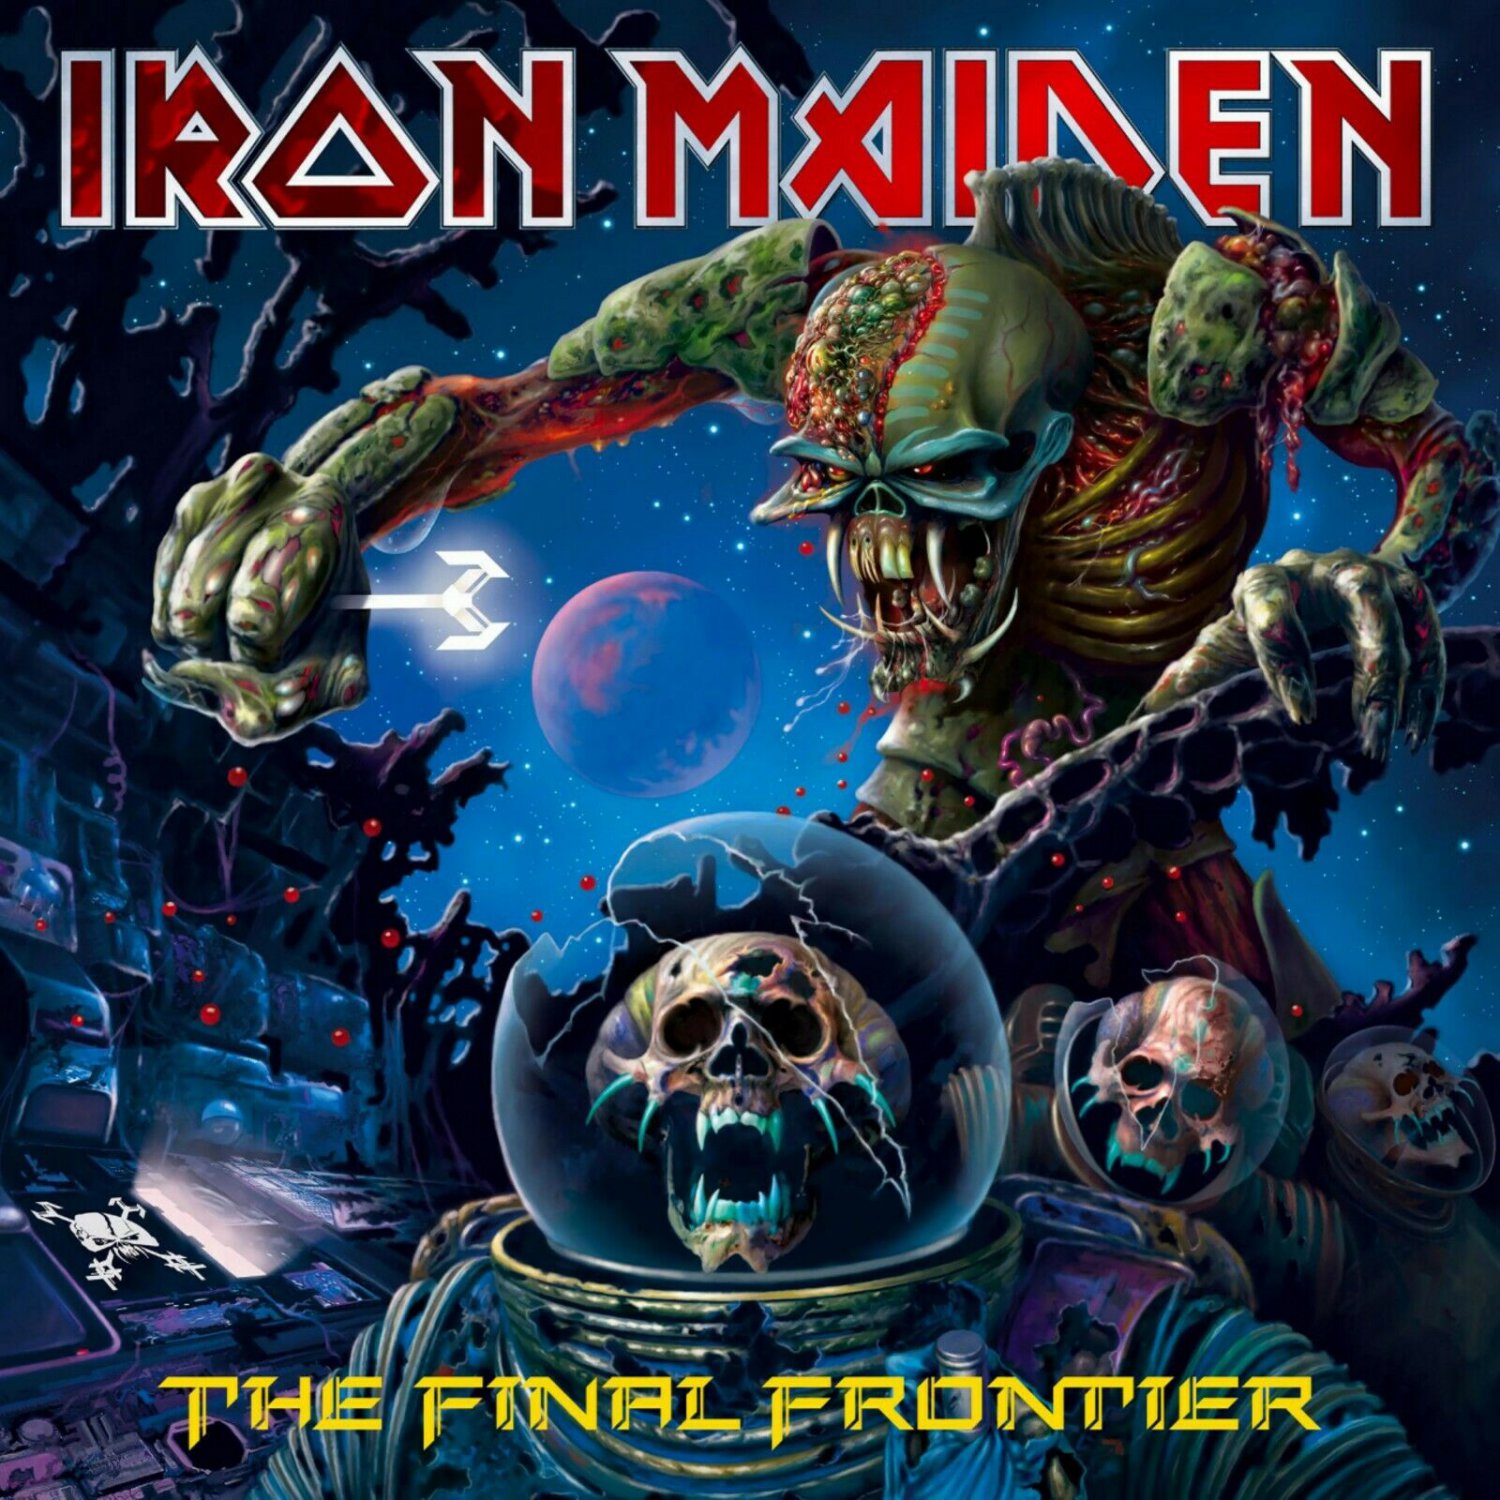 IRON MAIDEN The Final Frontier  BANNER Huge 4X4 Ft Fabric Poster Tapestry Flag Print album cover art